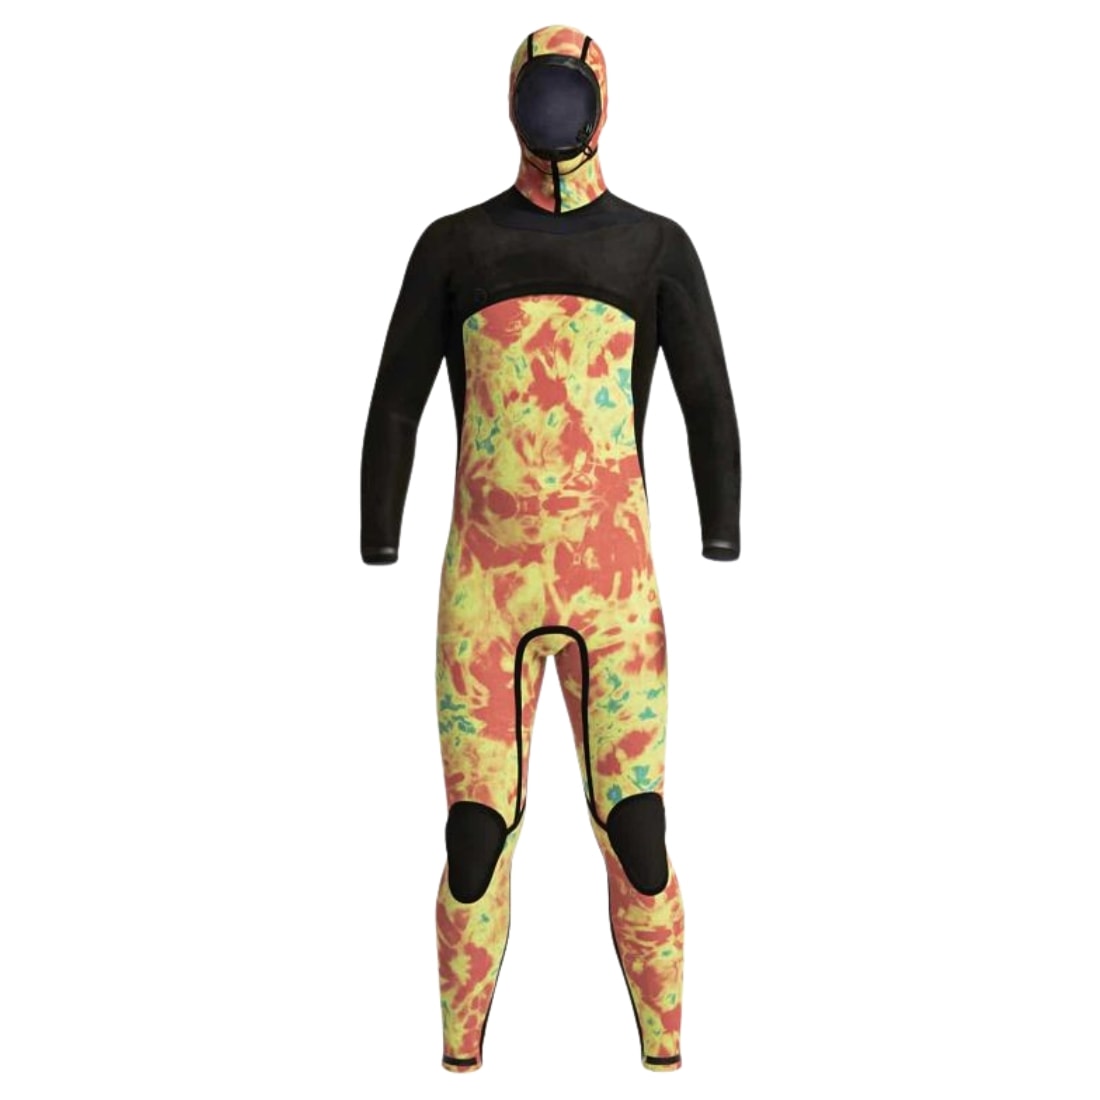 Xcel Mens Comp X 4.5/3.5mm Hooded Wetsuit 2022/23 - Black - Mens Full Length Wetsuit by Xcel